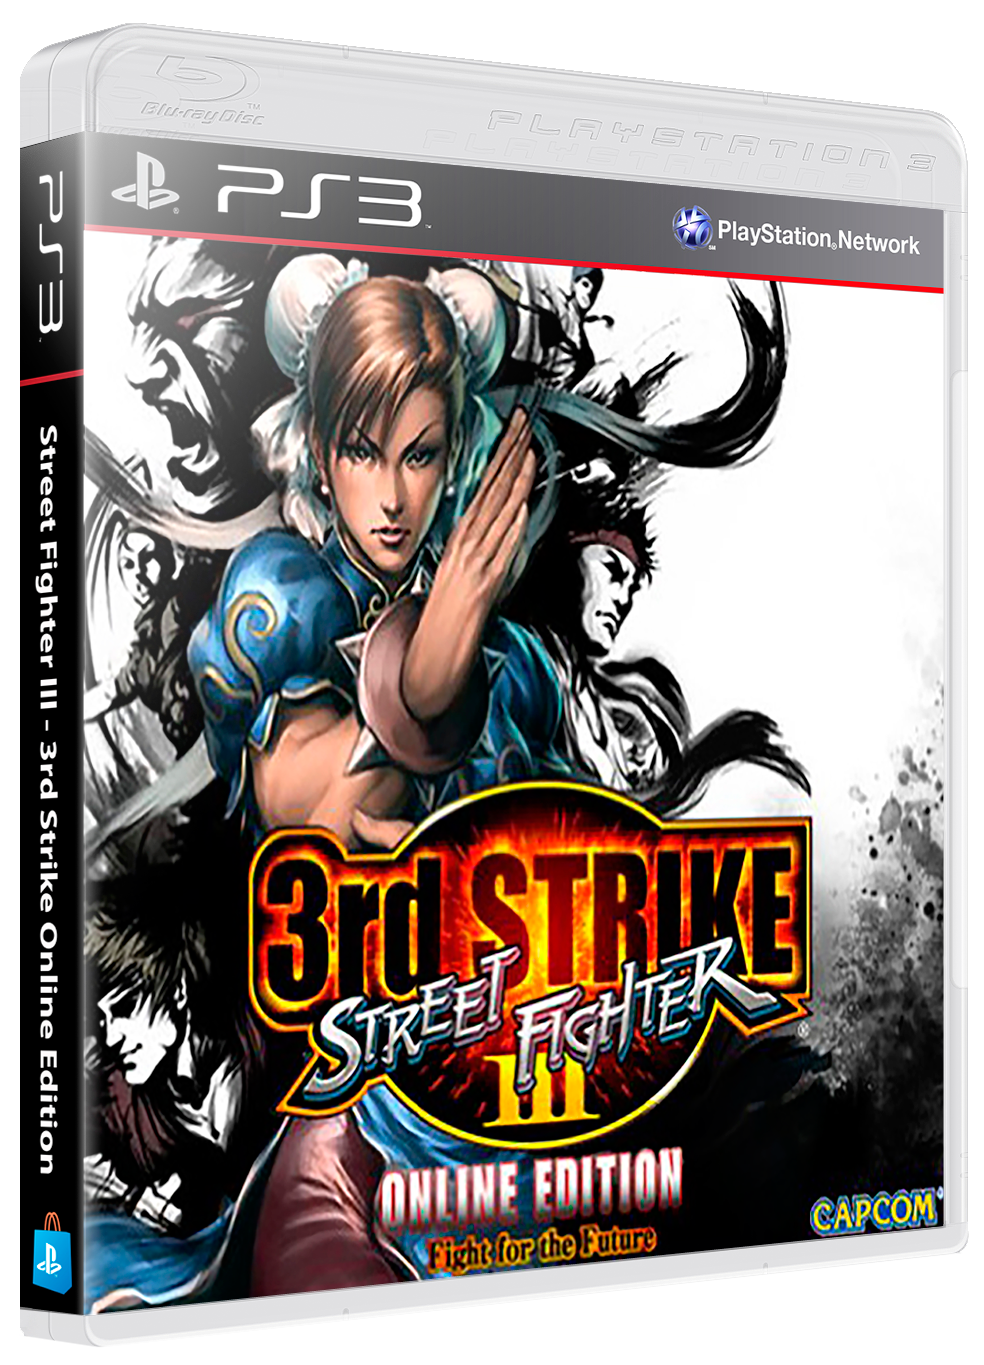 Street Fighter Iii Third Strike Online Edition Images Launchbox Games Database